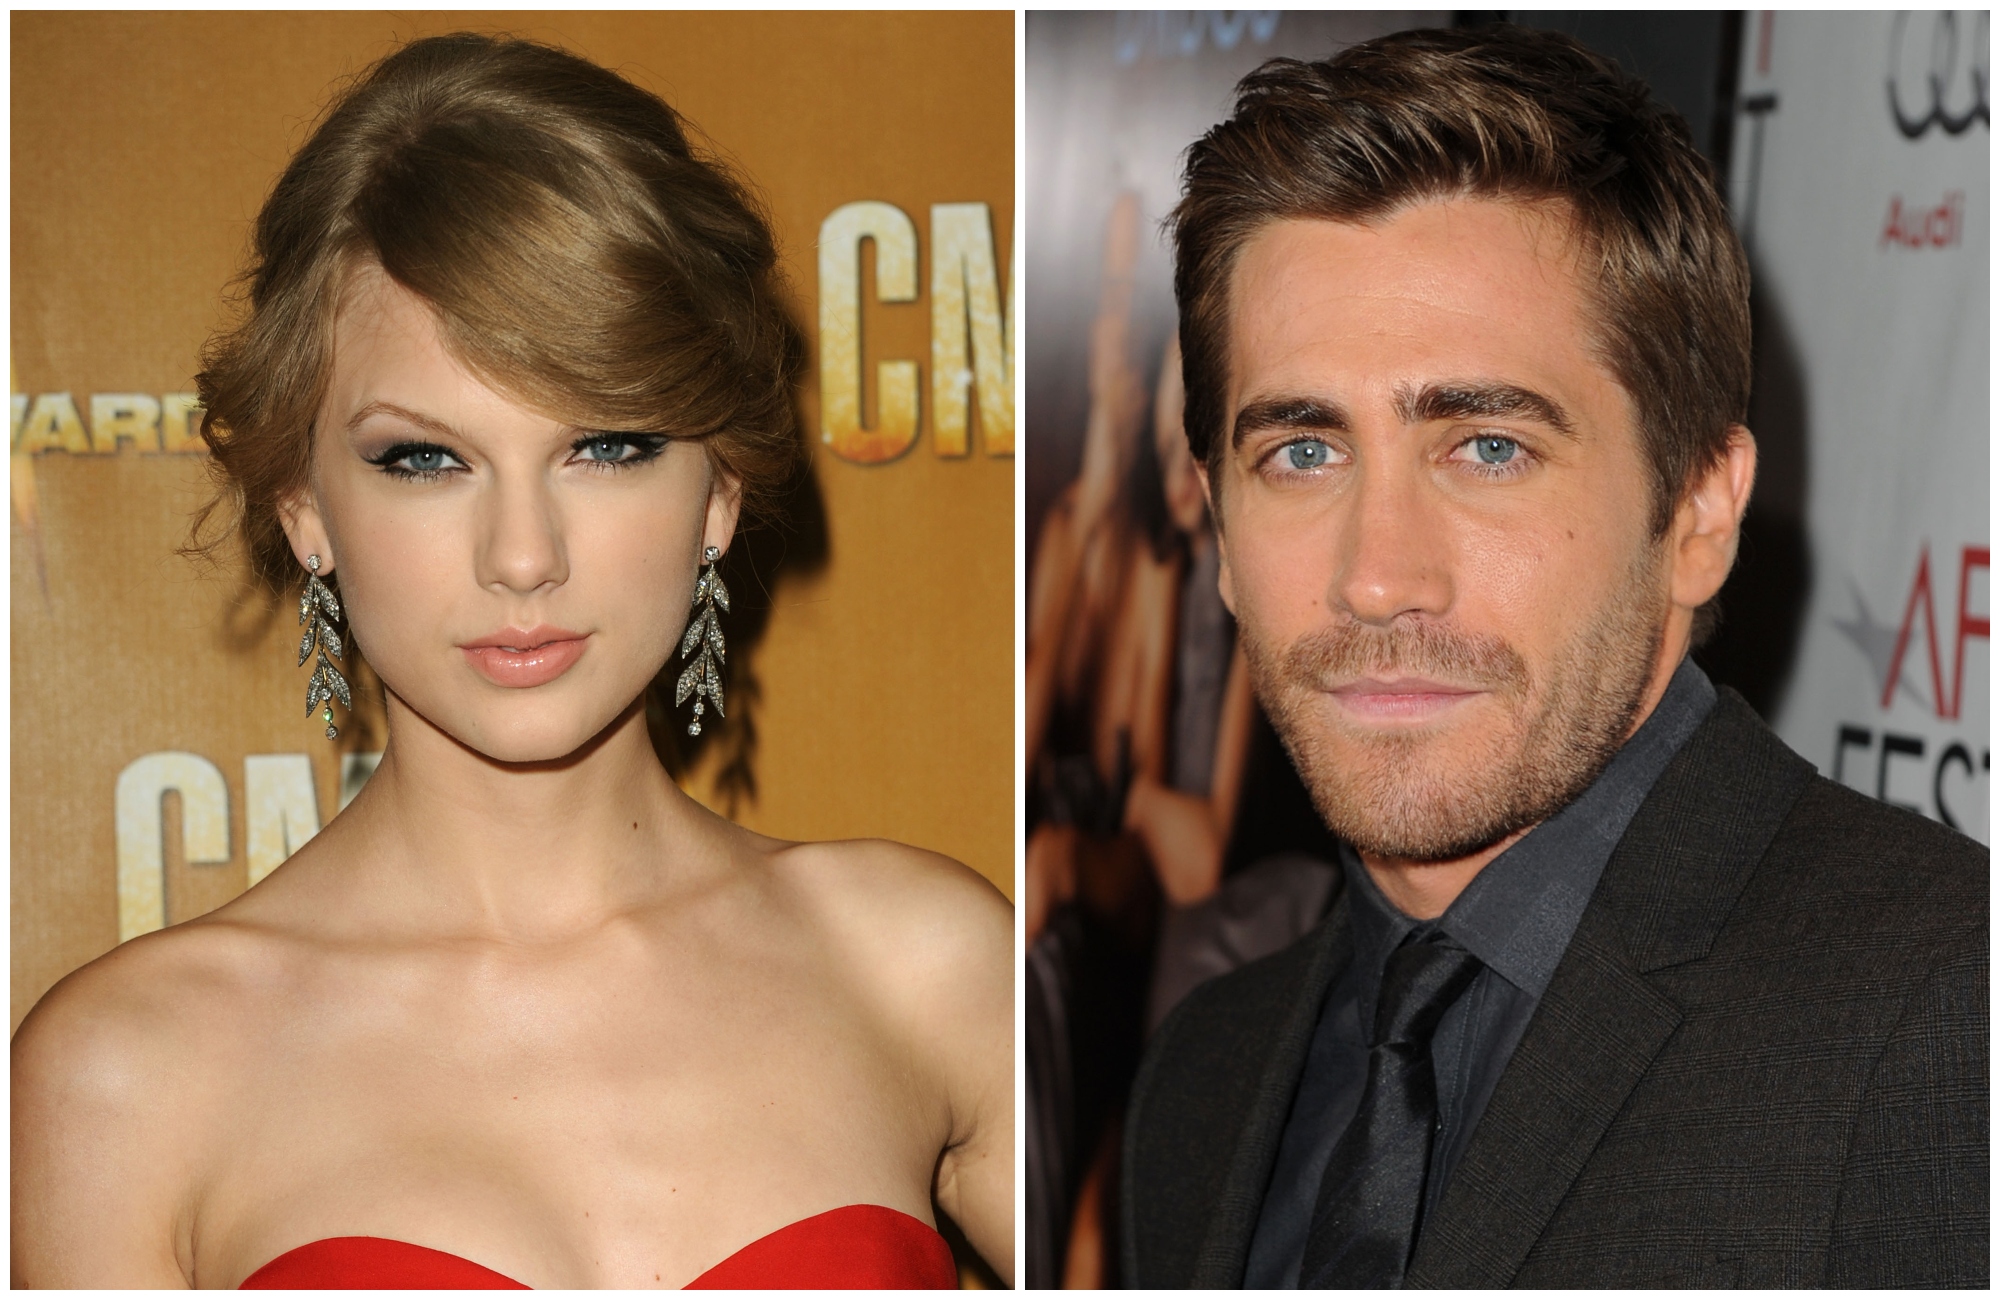 composite image of Taylor Swift and Jake Gyllenhaal